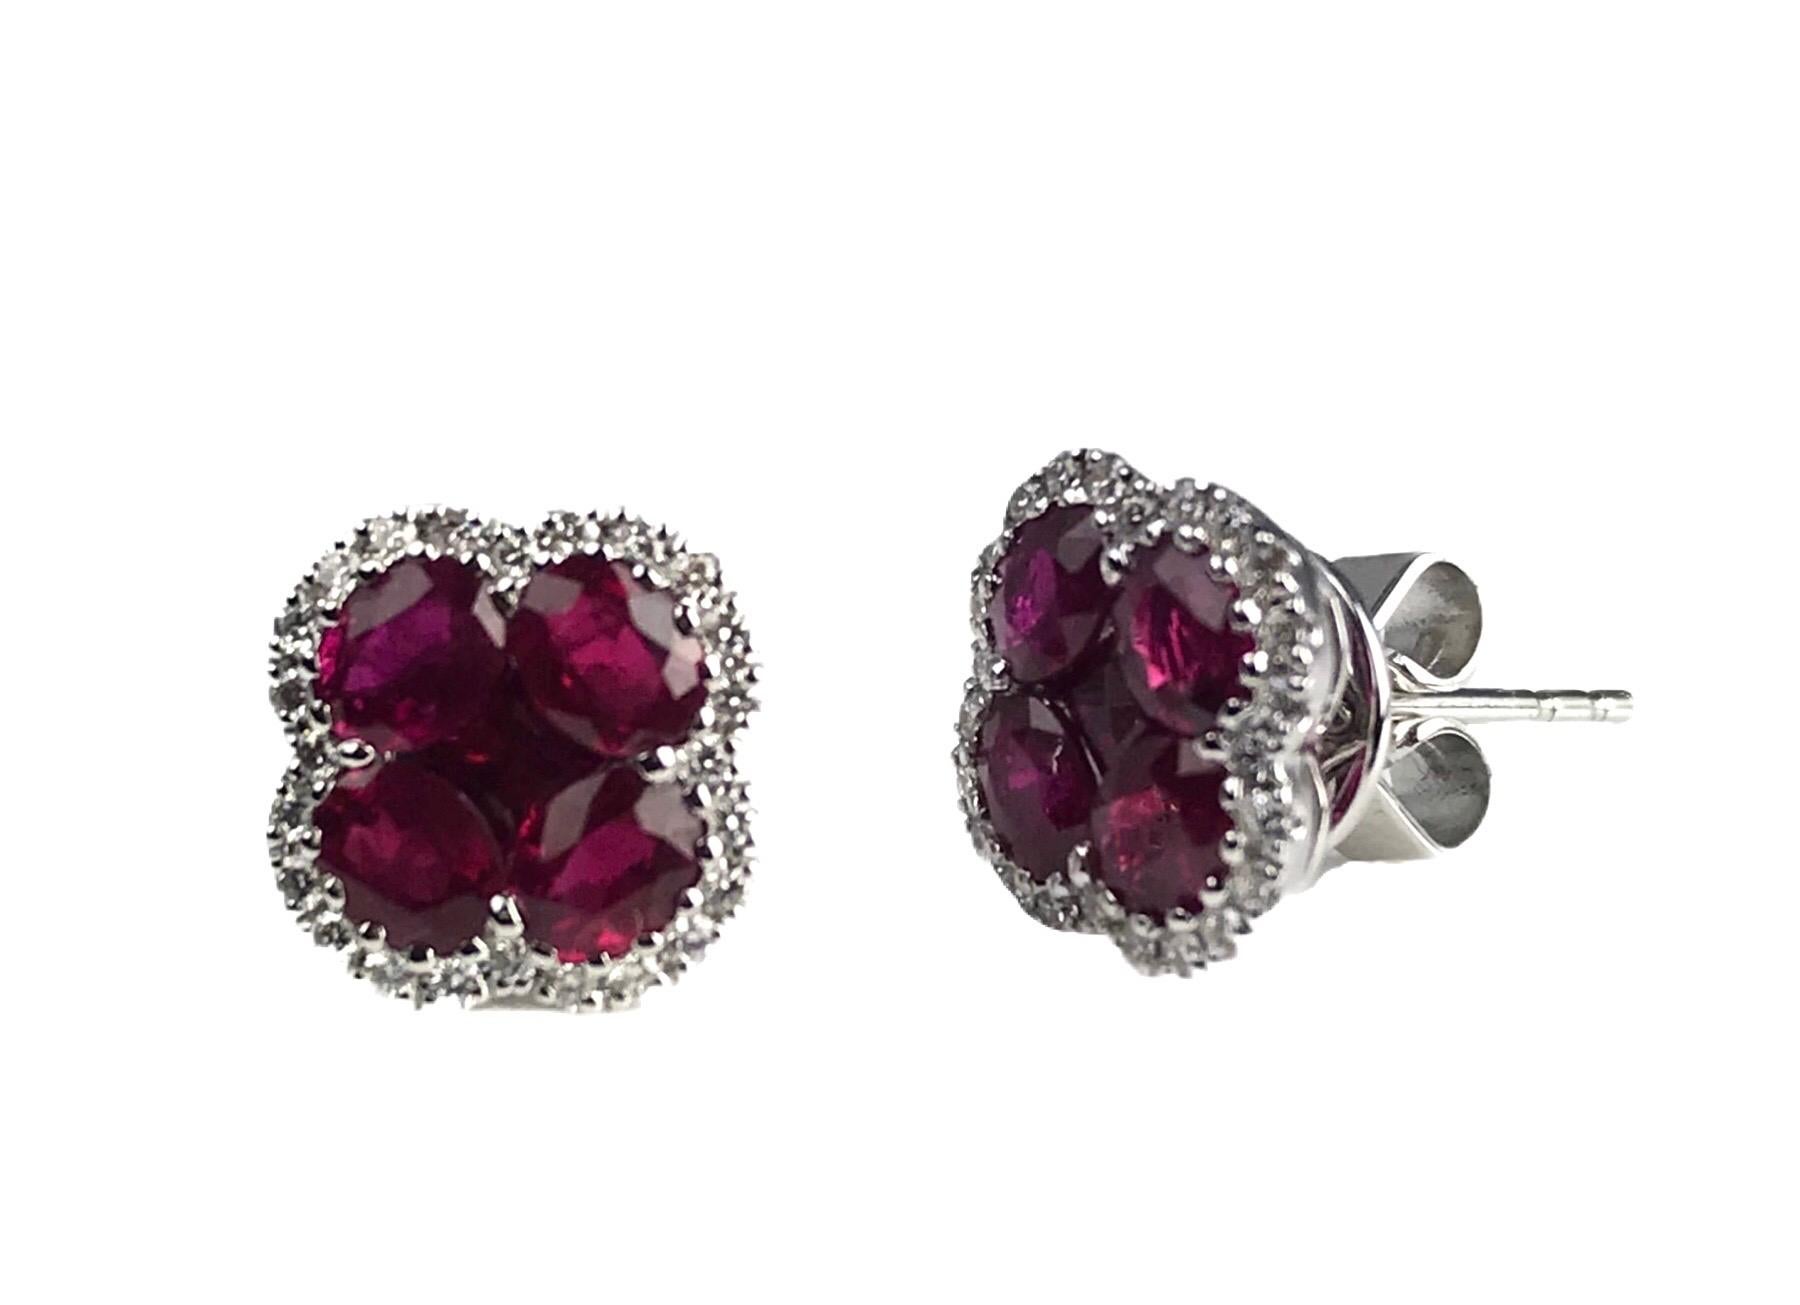 Elevate your jewelry collection with these exquisite earrings that radiate elegance and sophistication. Featuring four oval and one princess-cut rubies, these earrings are a true symbol of timeless beauty. The rubies are encircled by a dazzling halo